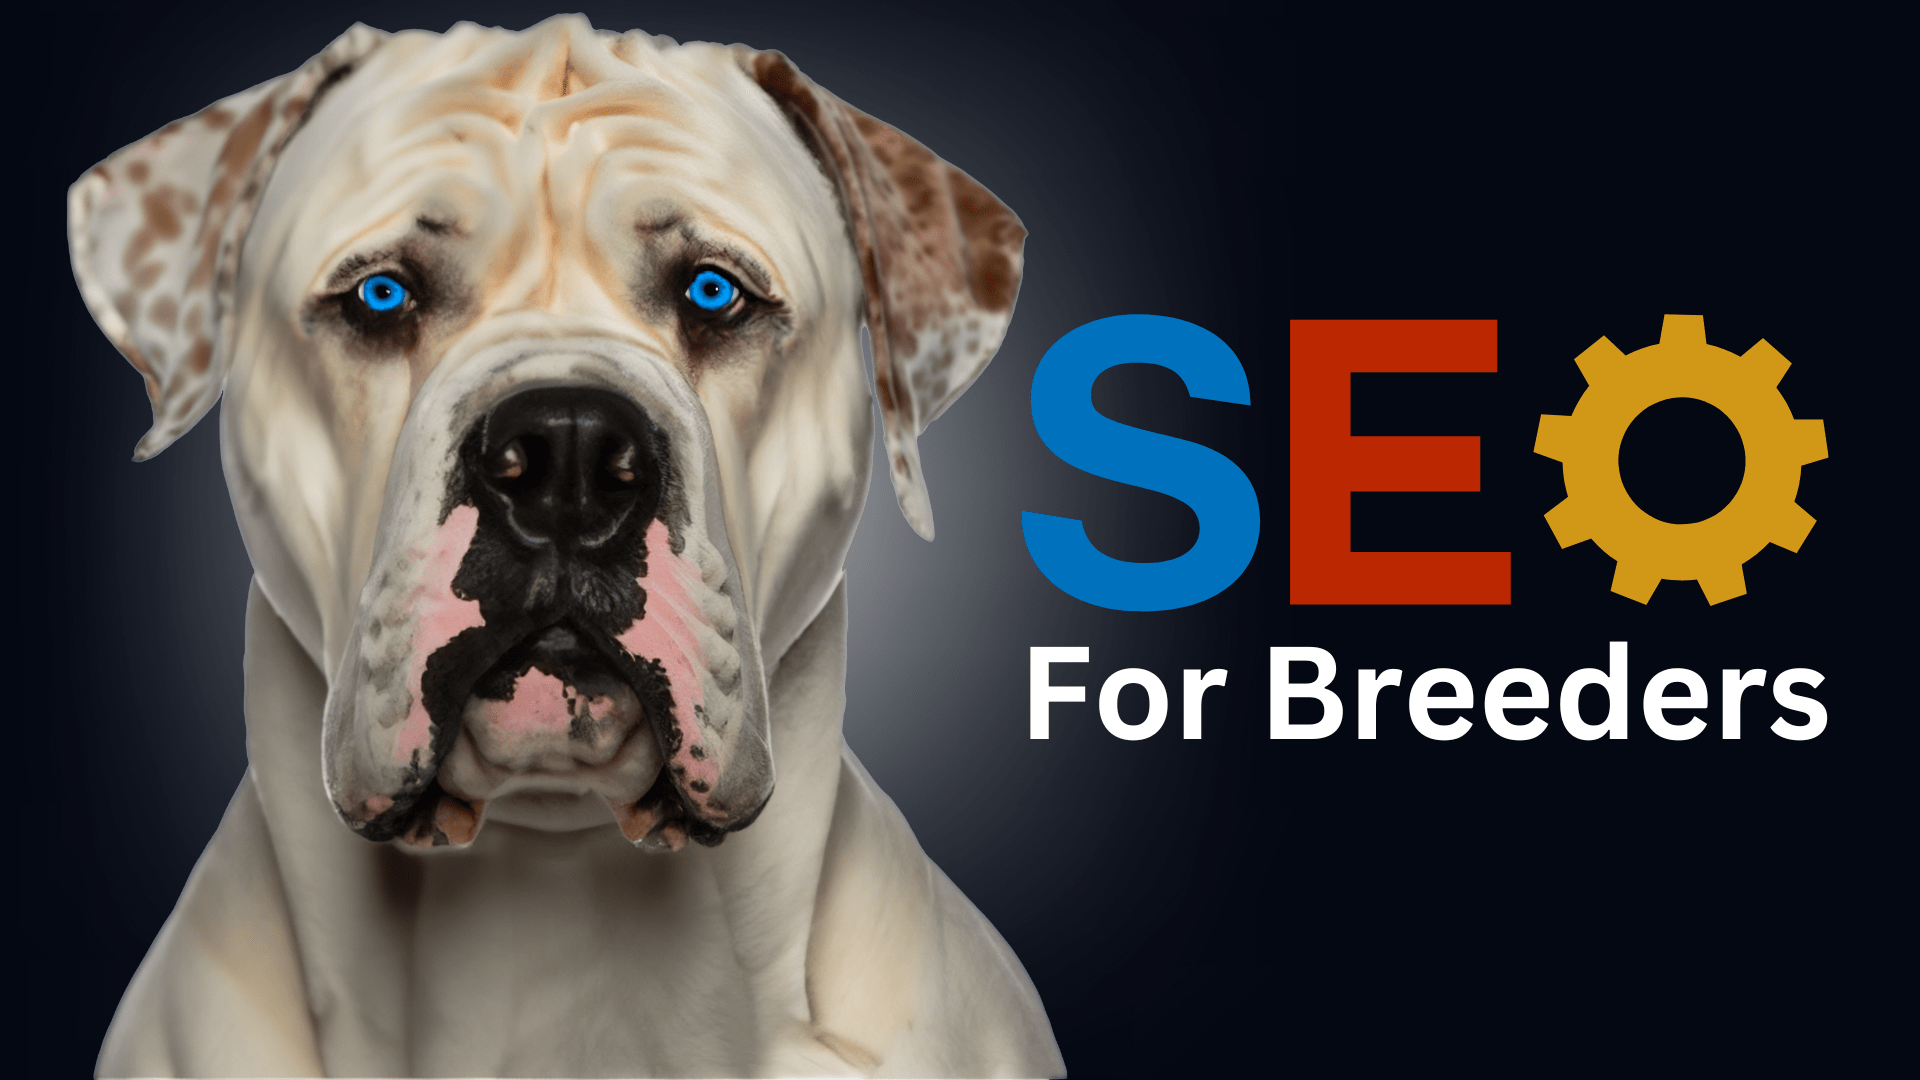 What is SEO for breeders and do I need SEO for dog breeder website design